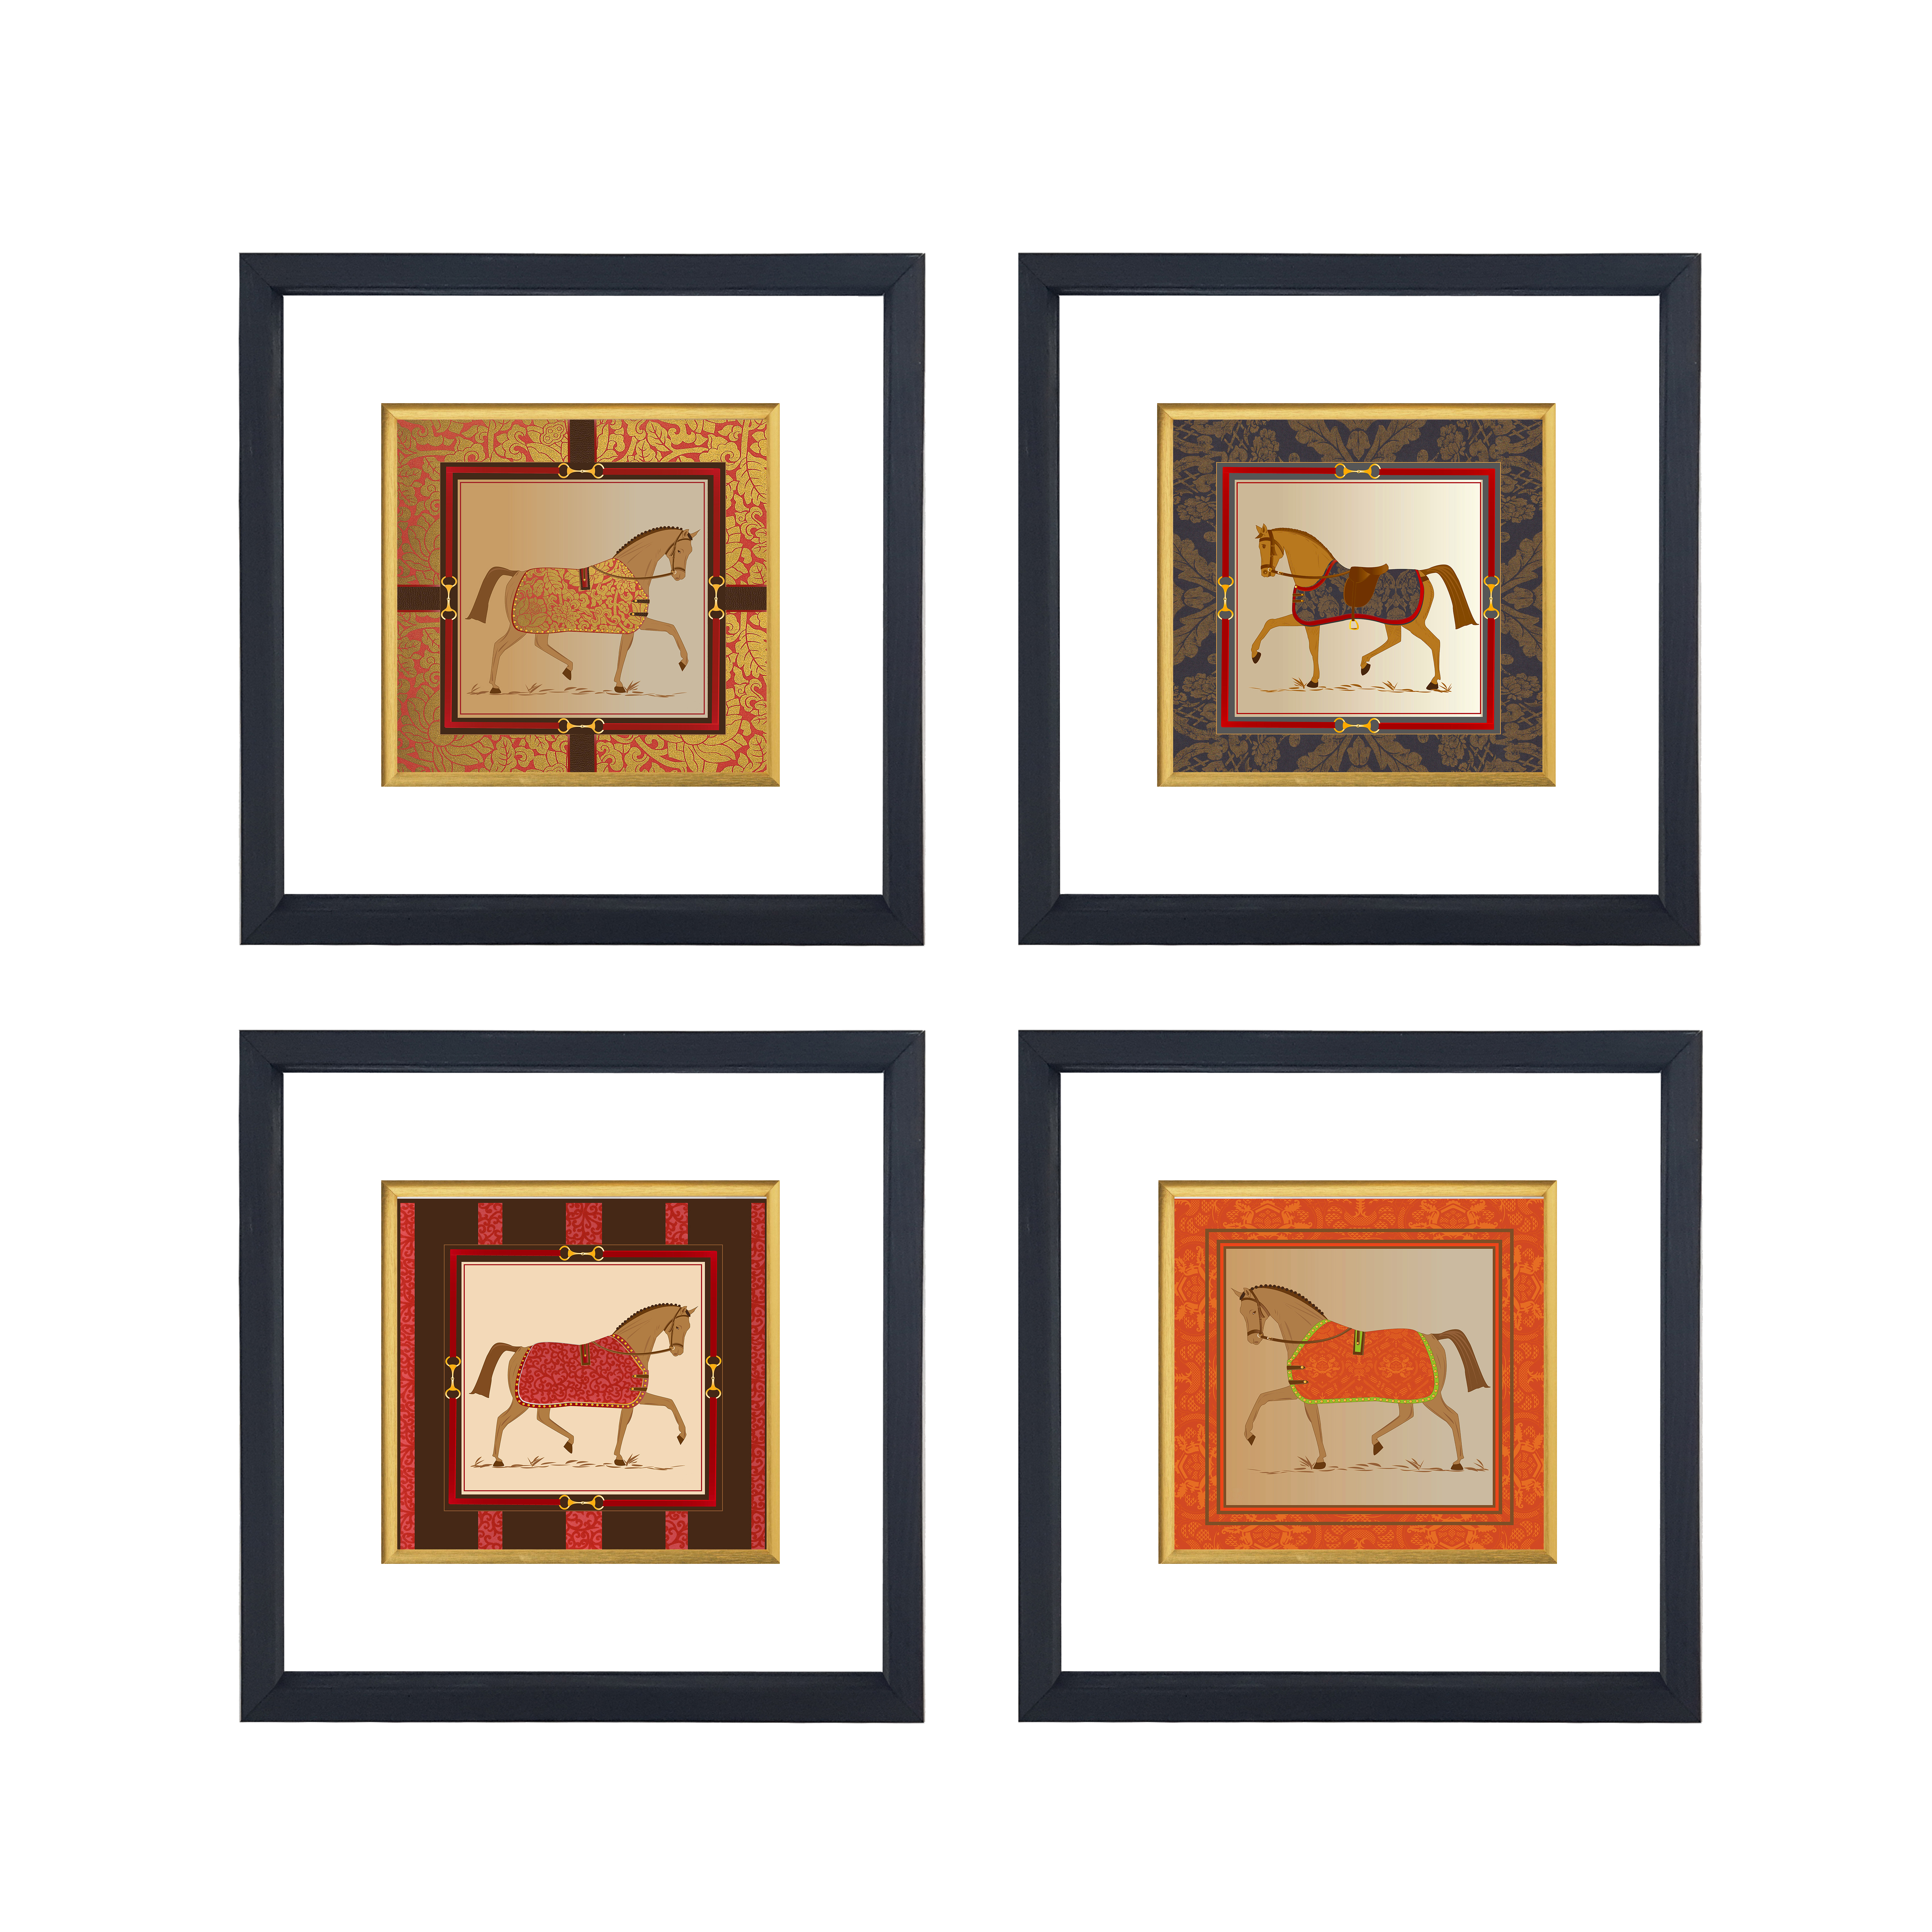 4 Piece Black-Gold Framed Glass Painting